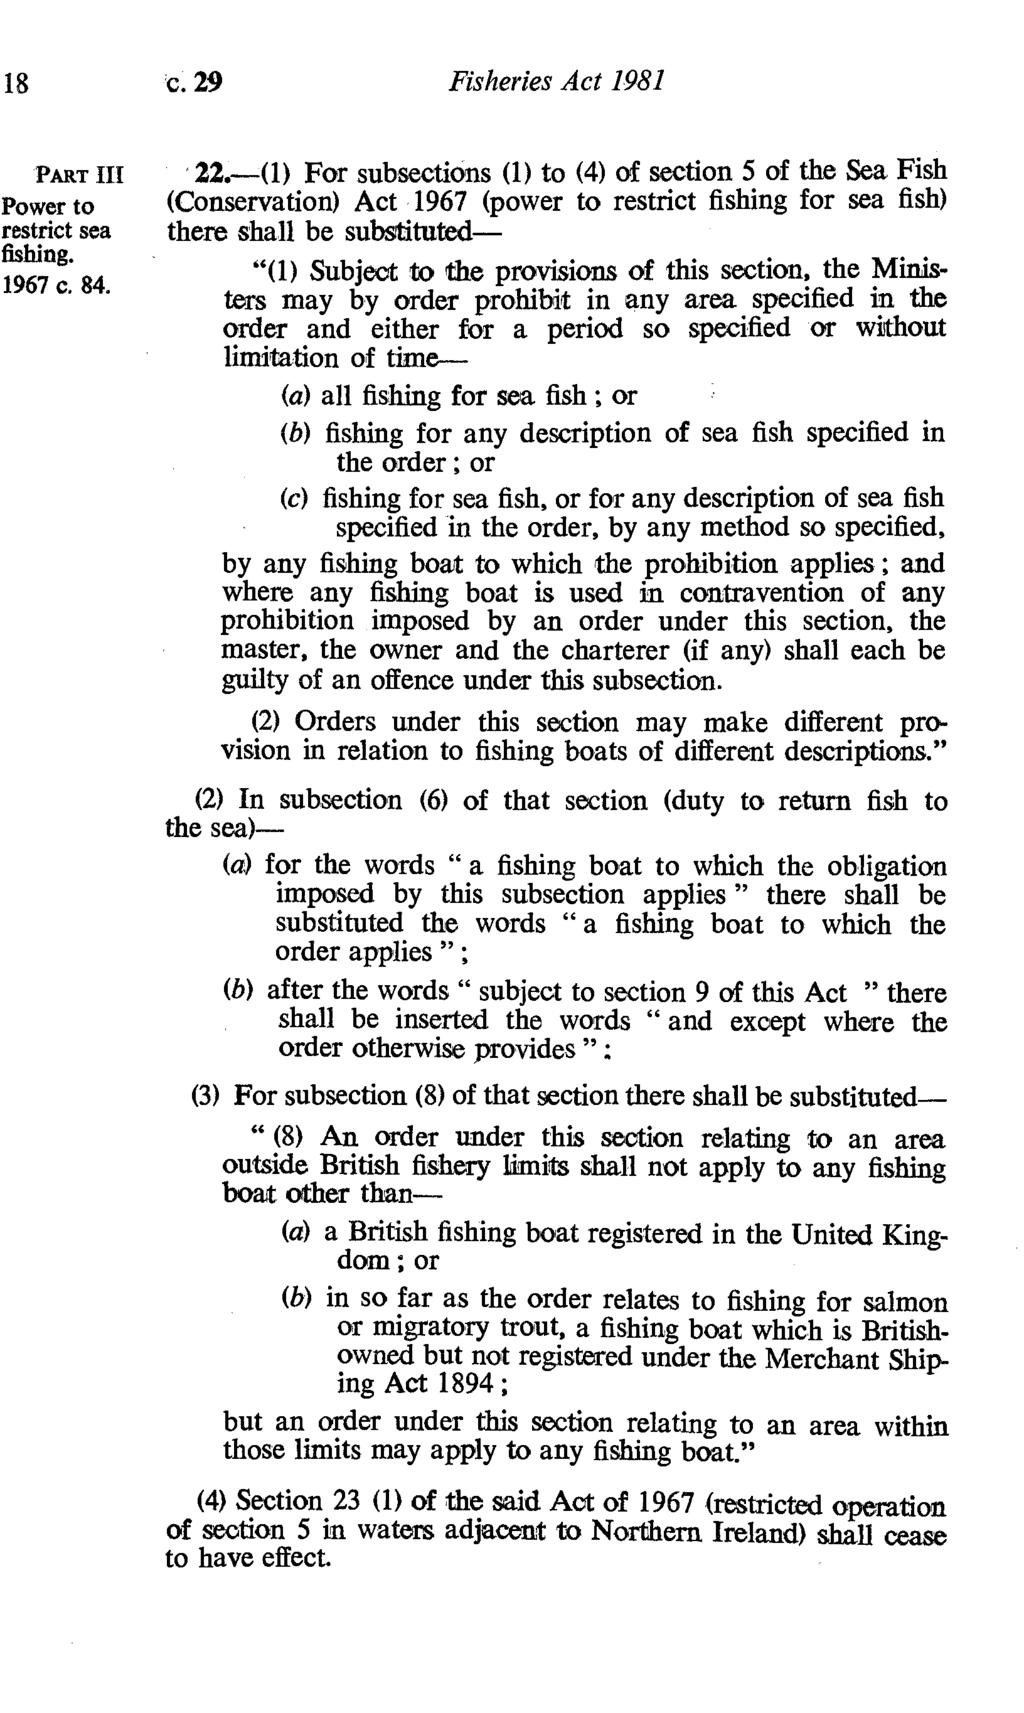 18 c. 29 Fisheries Act 1981 PART III power to restrict sea '22,0) For subsections (1) to (4) of section 5 of the Sea, Fish (Conservation) Act 1967 (power to restrict fishing for sea fish) there shall